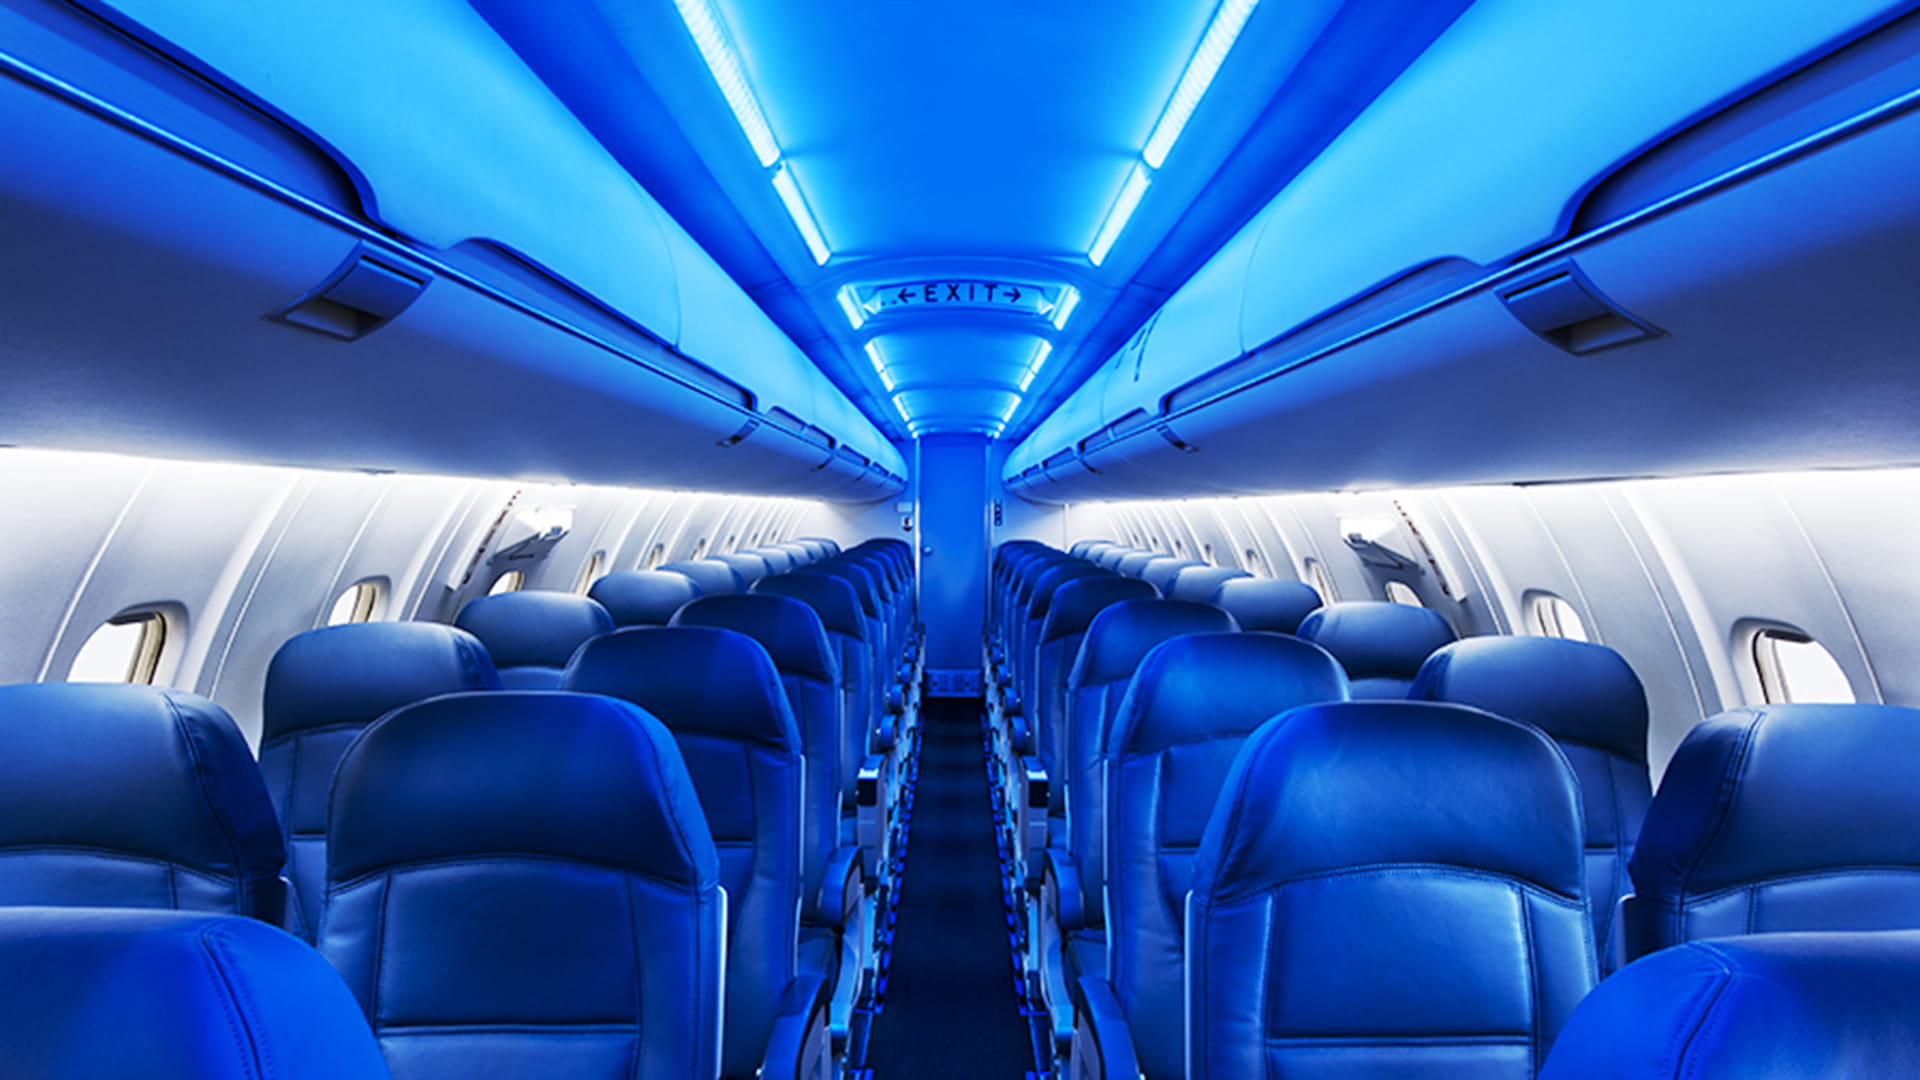 Tapestry lighting system used aboard a Delta Airlines plane